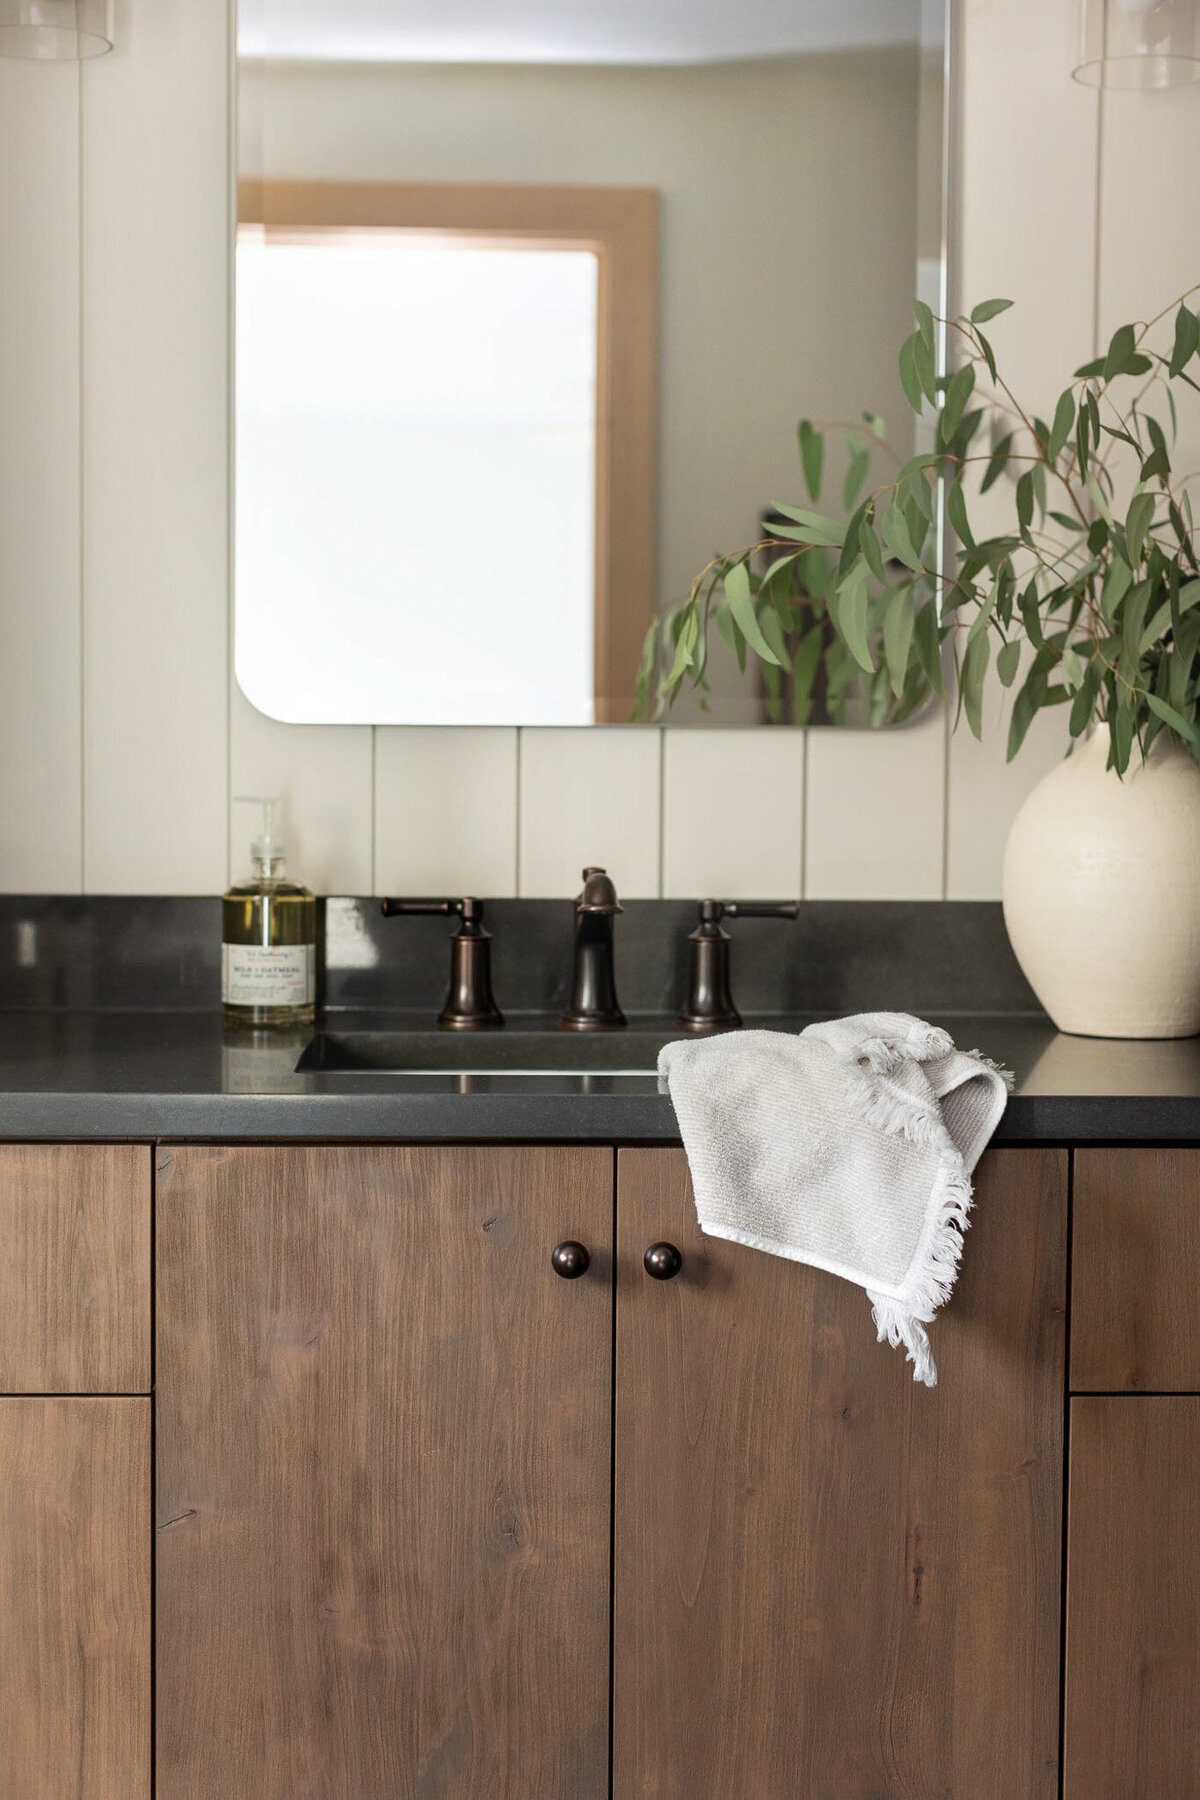 Natural wood bathroom vanity with dark grey countertops and antique bronze widespread faucet. Grey and white towel draped over the sink. Bottle of soap to the left of the sink. Large beige vase with green florals to the right of the sink. Off-white shiplap on the wall behind the vanity with a mirror.